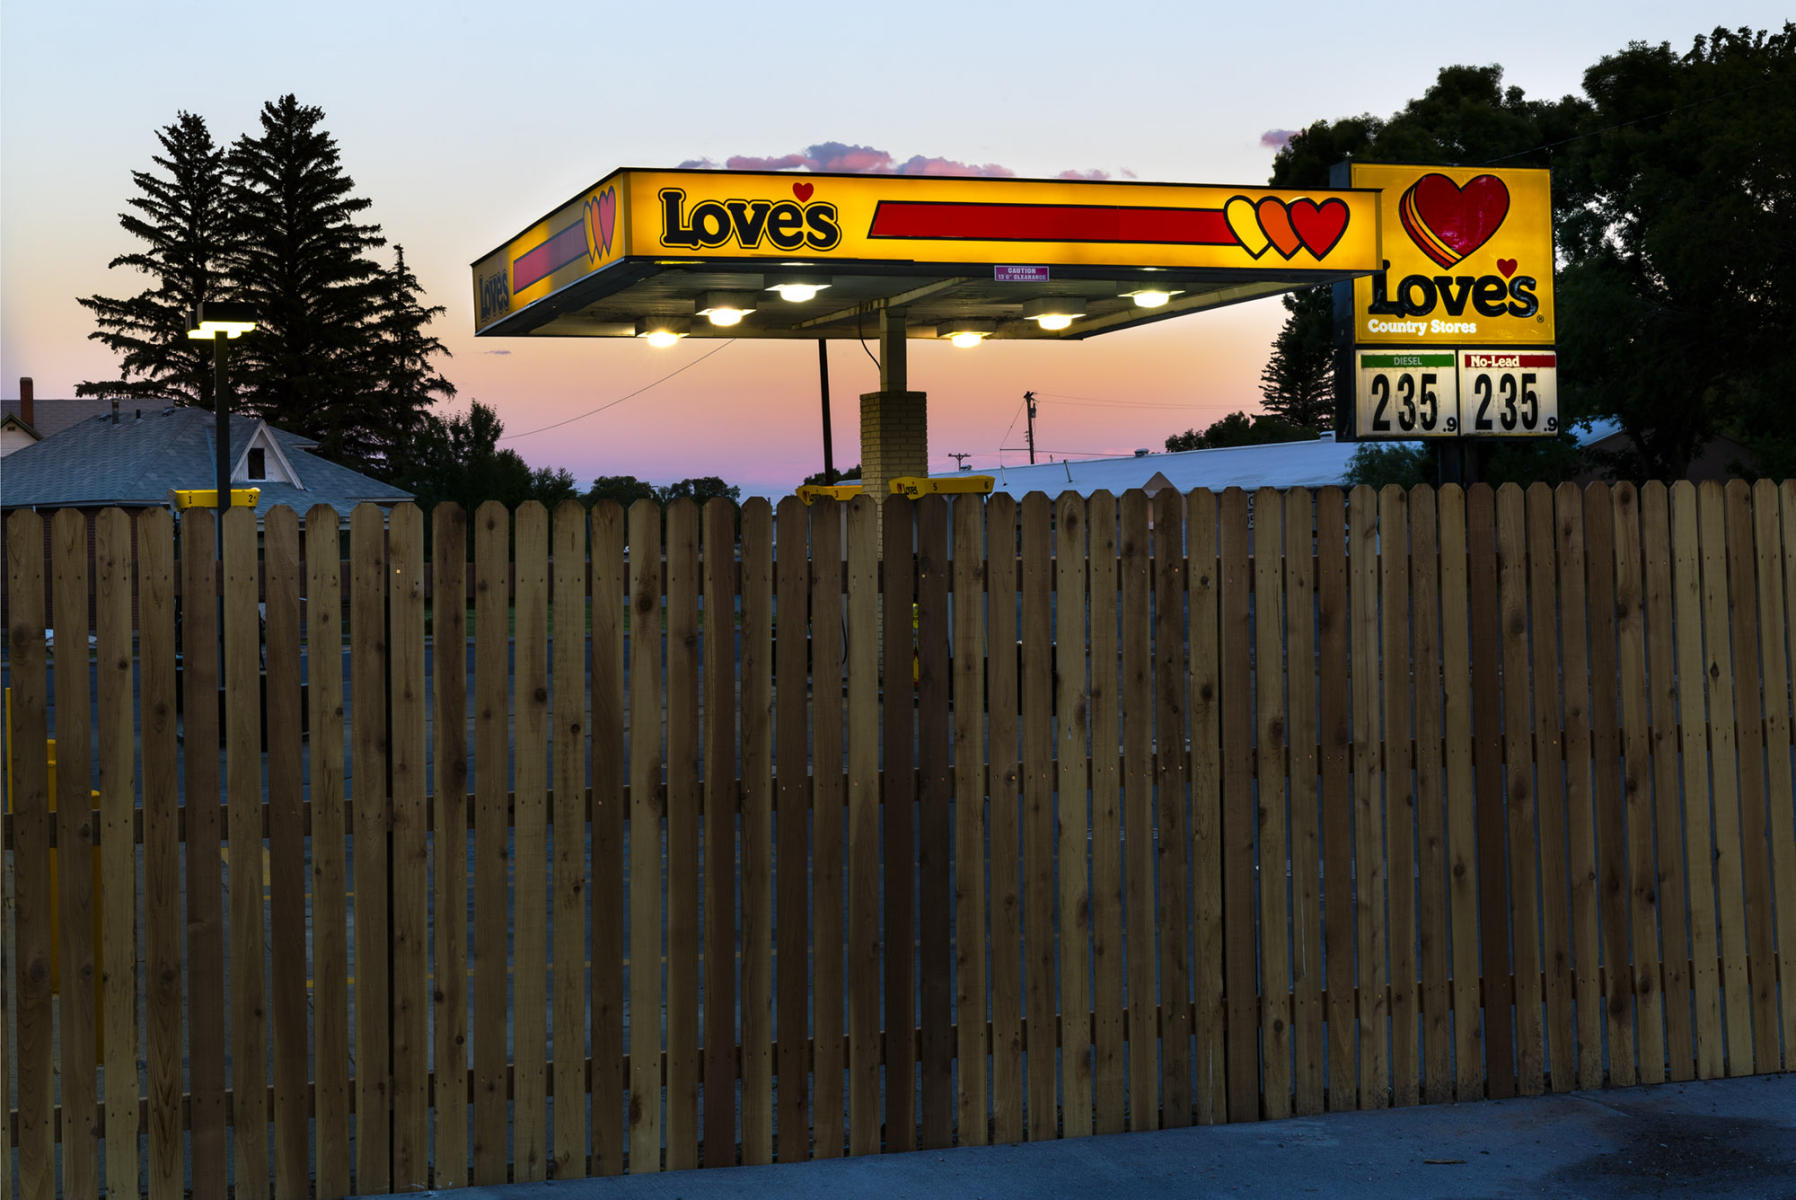 View of Love's gas station from the parking lot of the hotel in Monte Vista, CO. : Visiting Mom : New York City based photographer and video specializing in portrait corporate portraits, video, editorial stories for on location and architectural photography